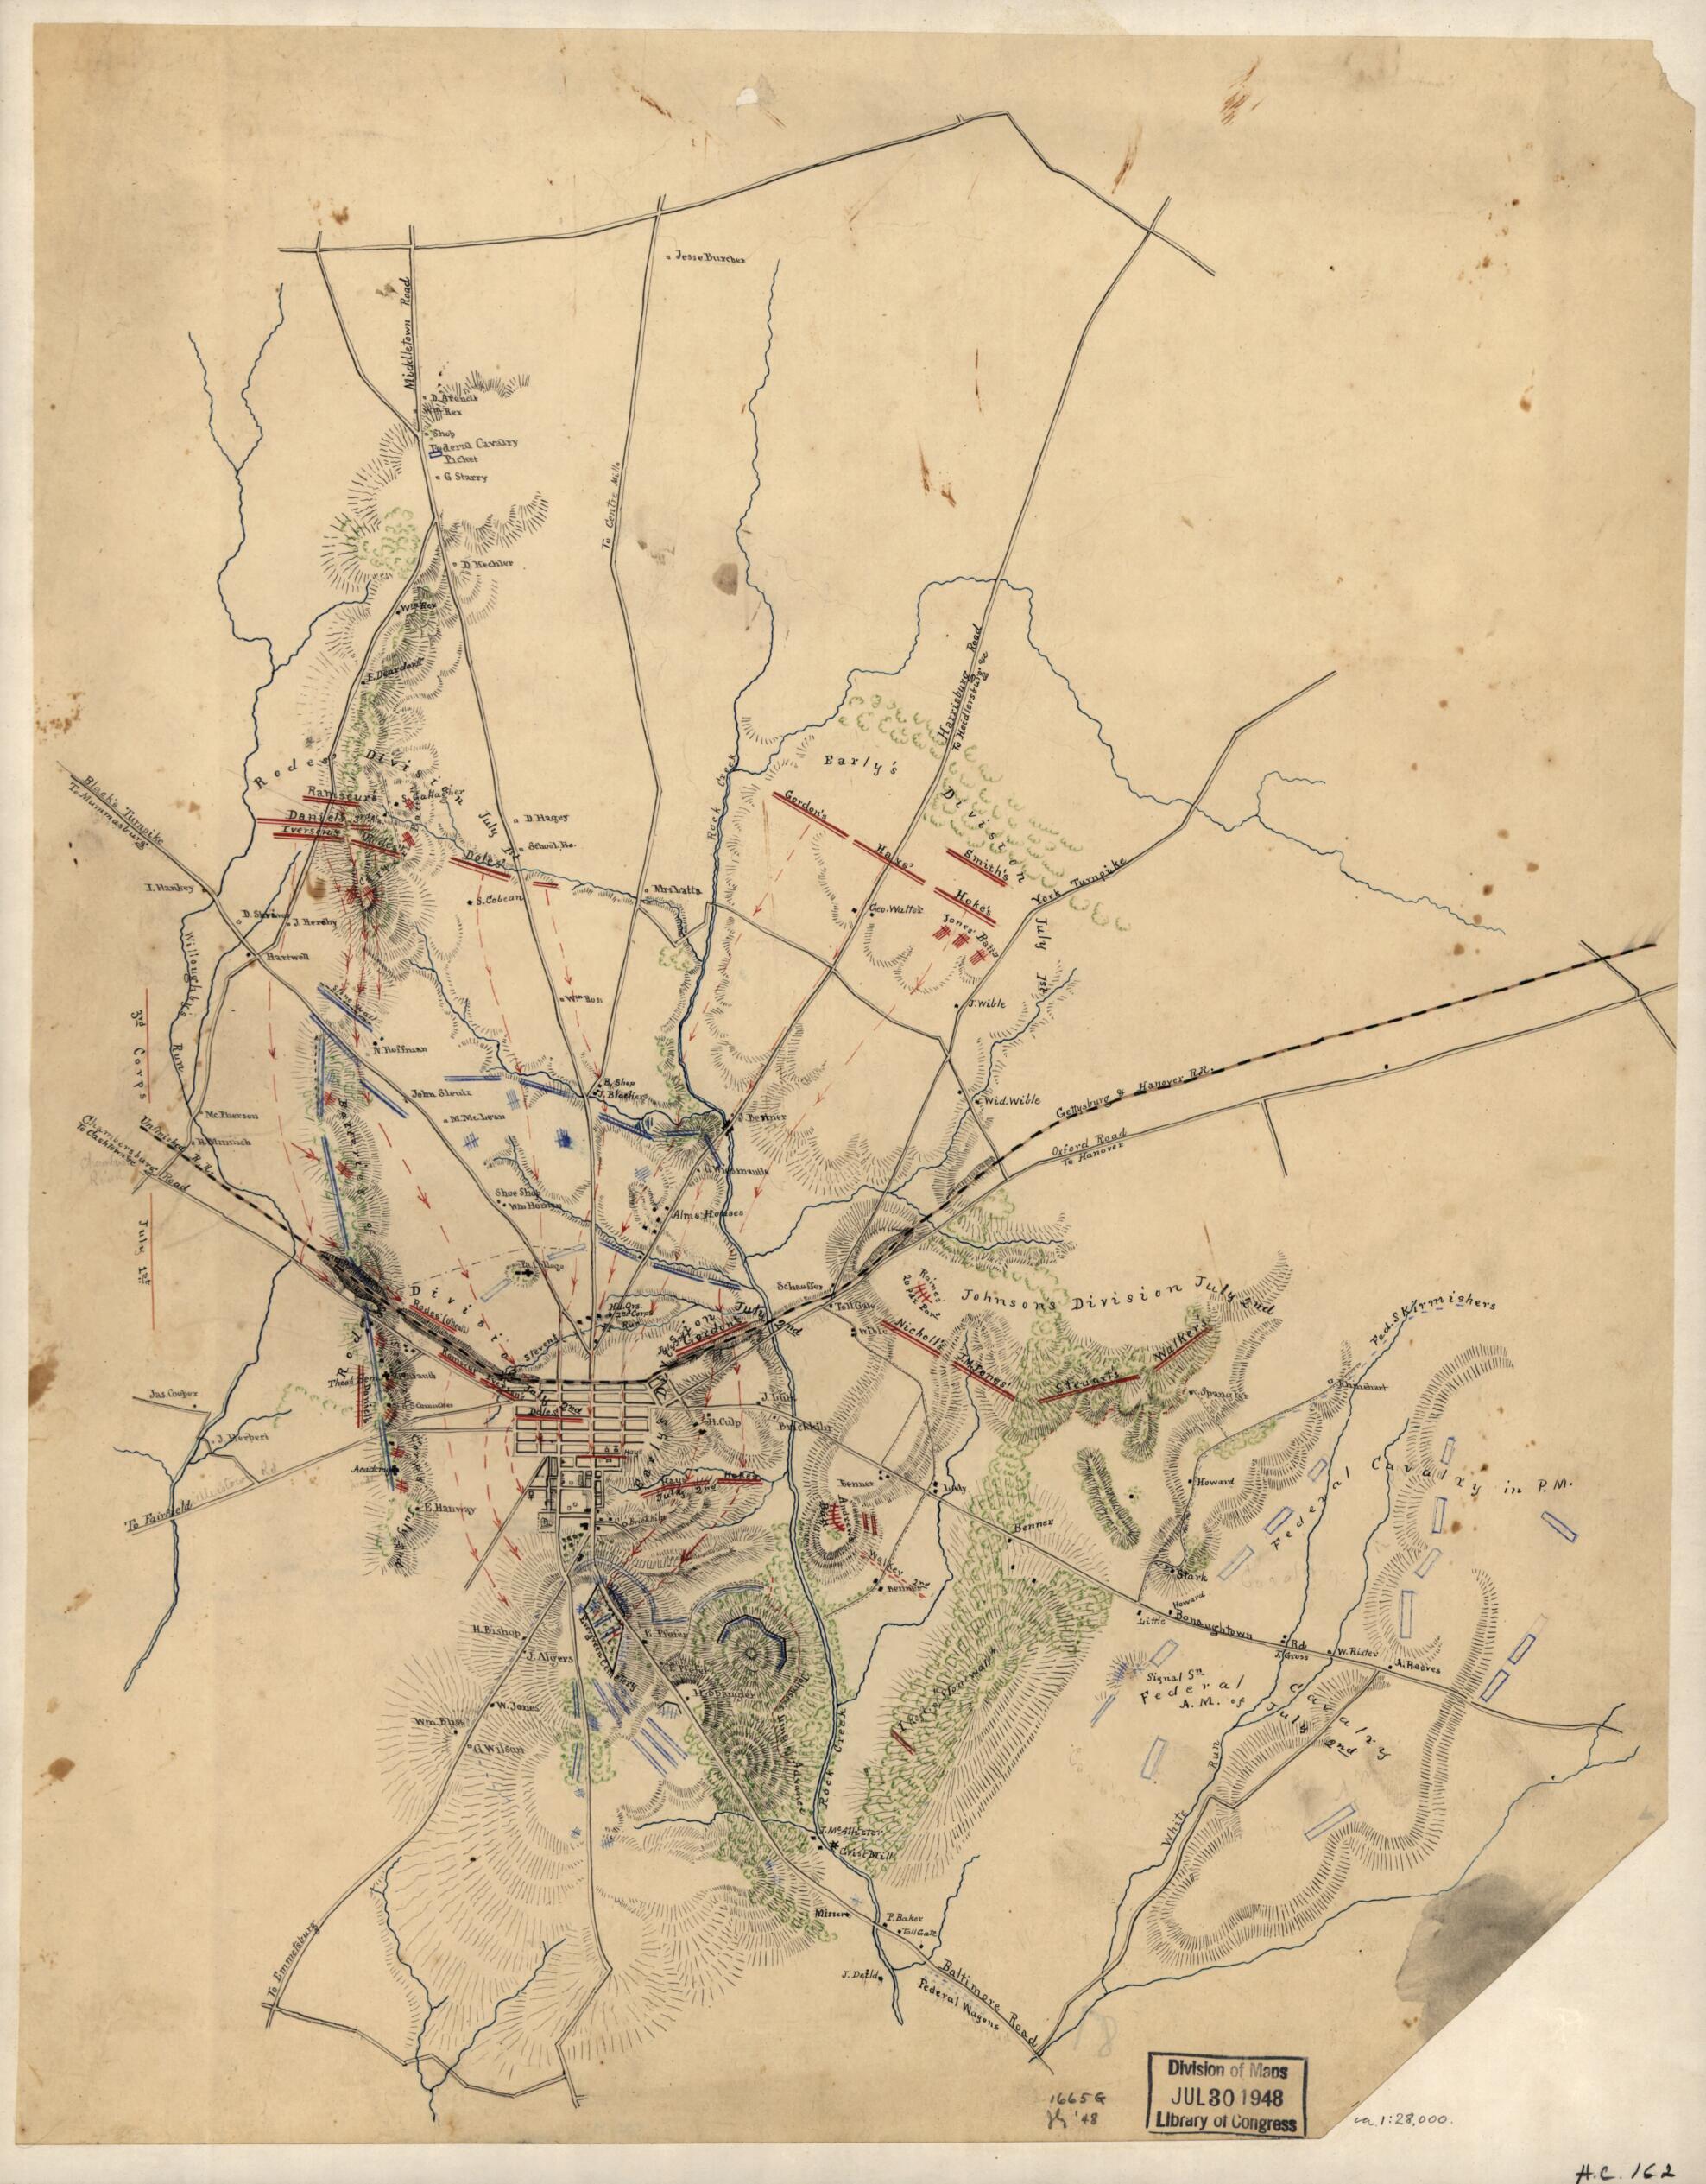 This old map of Sketch of the Battlefield of Gettysburg, July 1st and 2nd, from 1863 was created by  in 1863